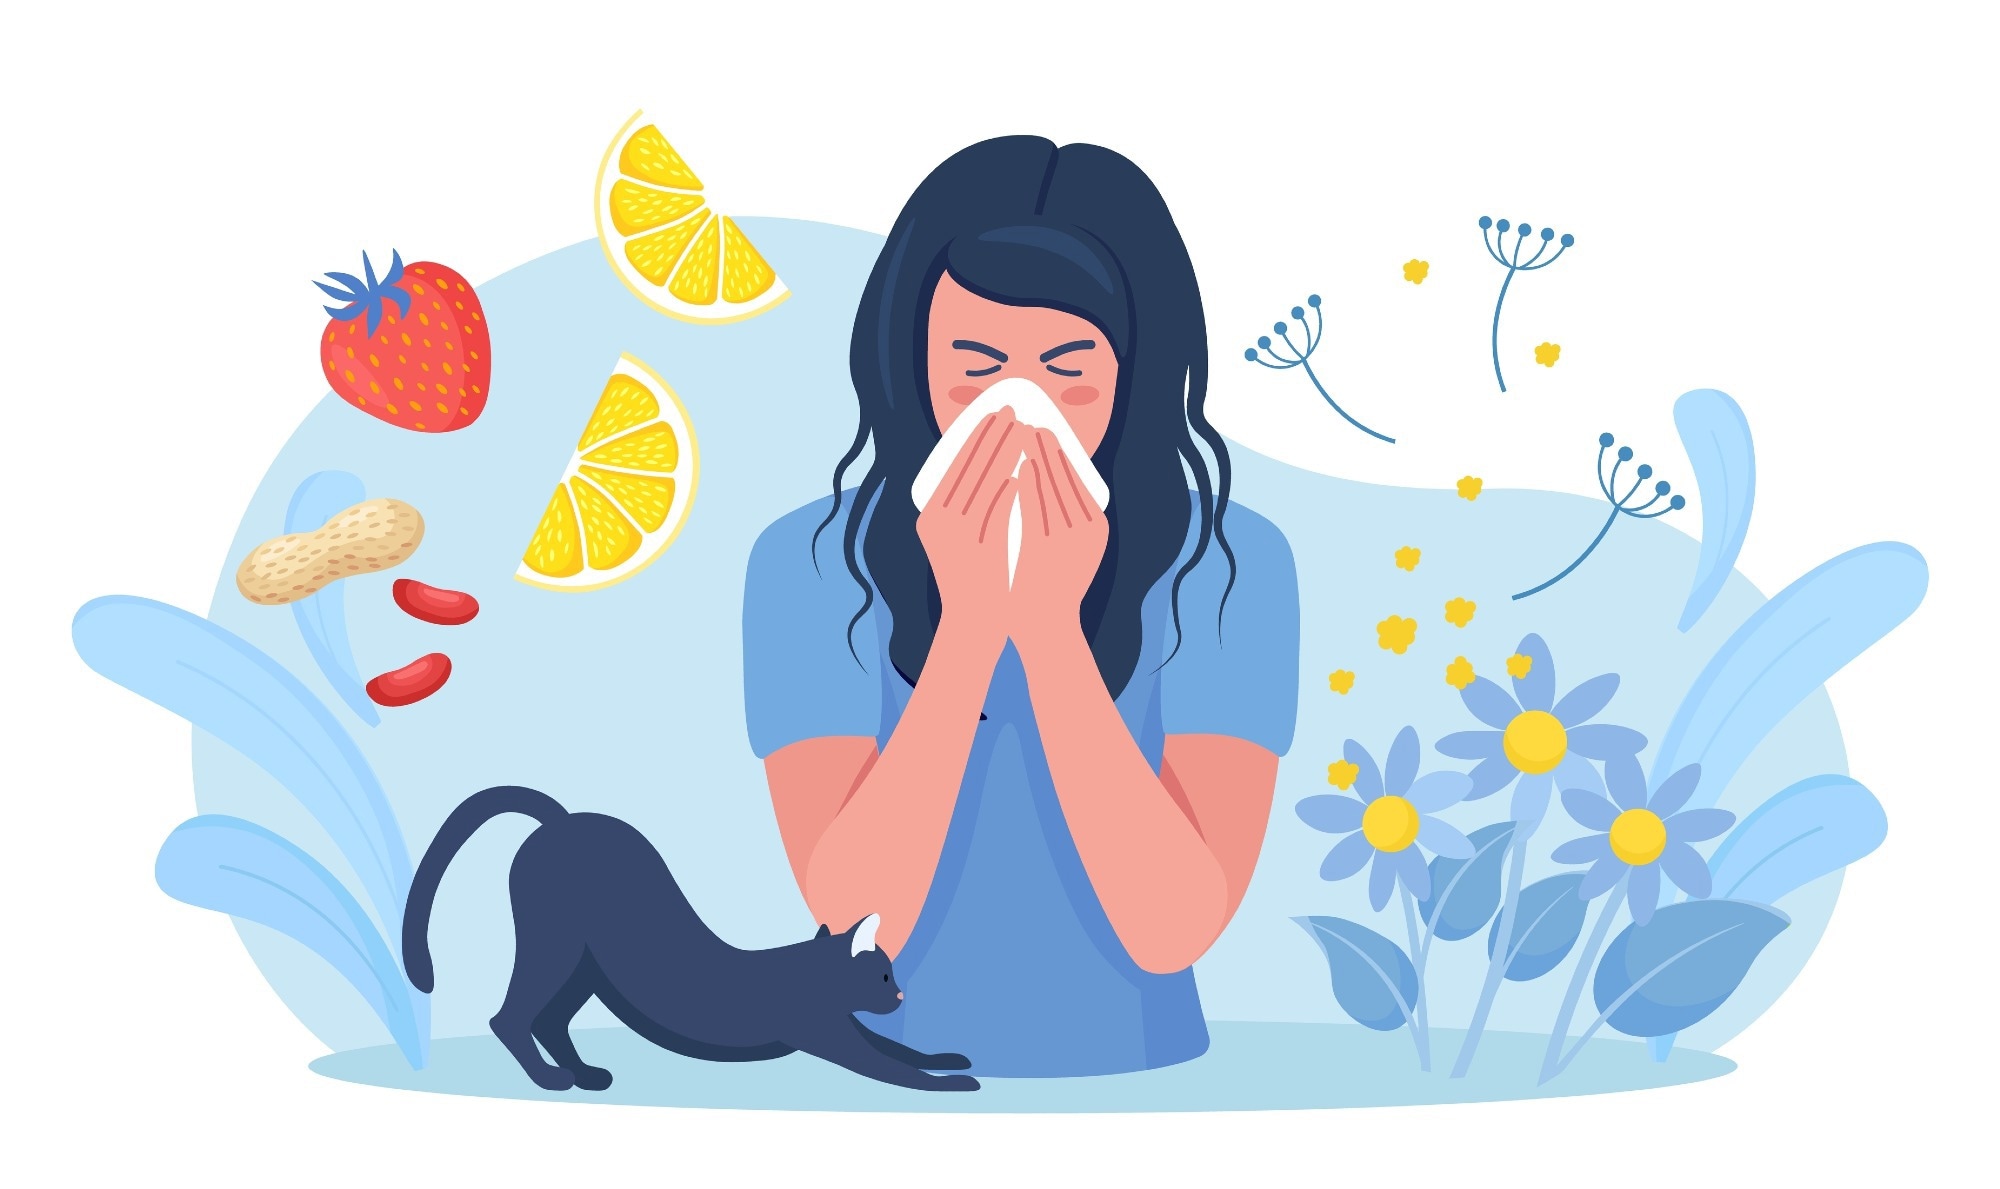 Study: Allergy: Mechanistic insights into new methods of prevention and therapy. Image Credit: Buravleva stock/Shutterstock